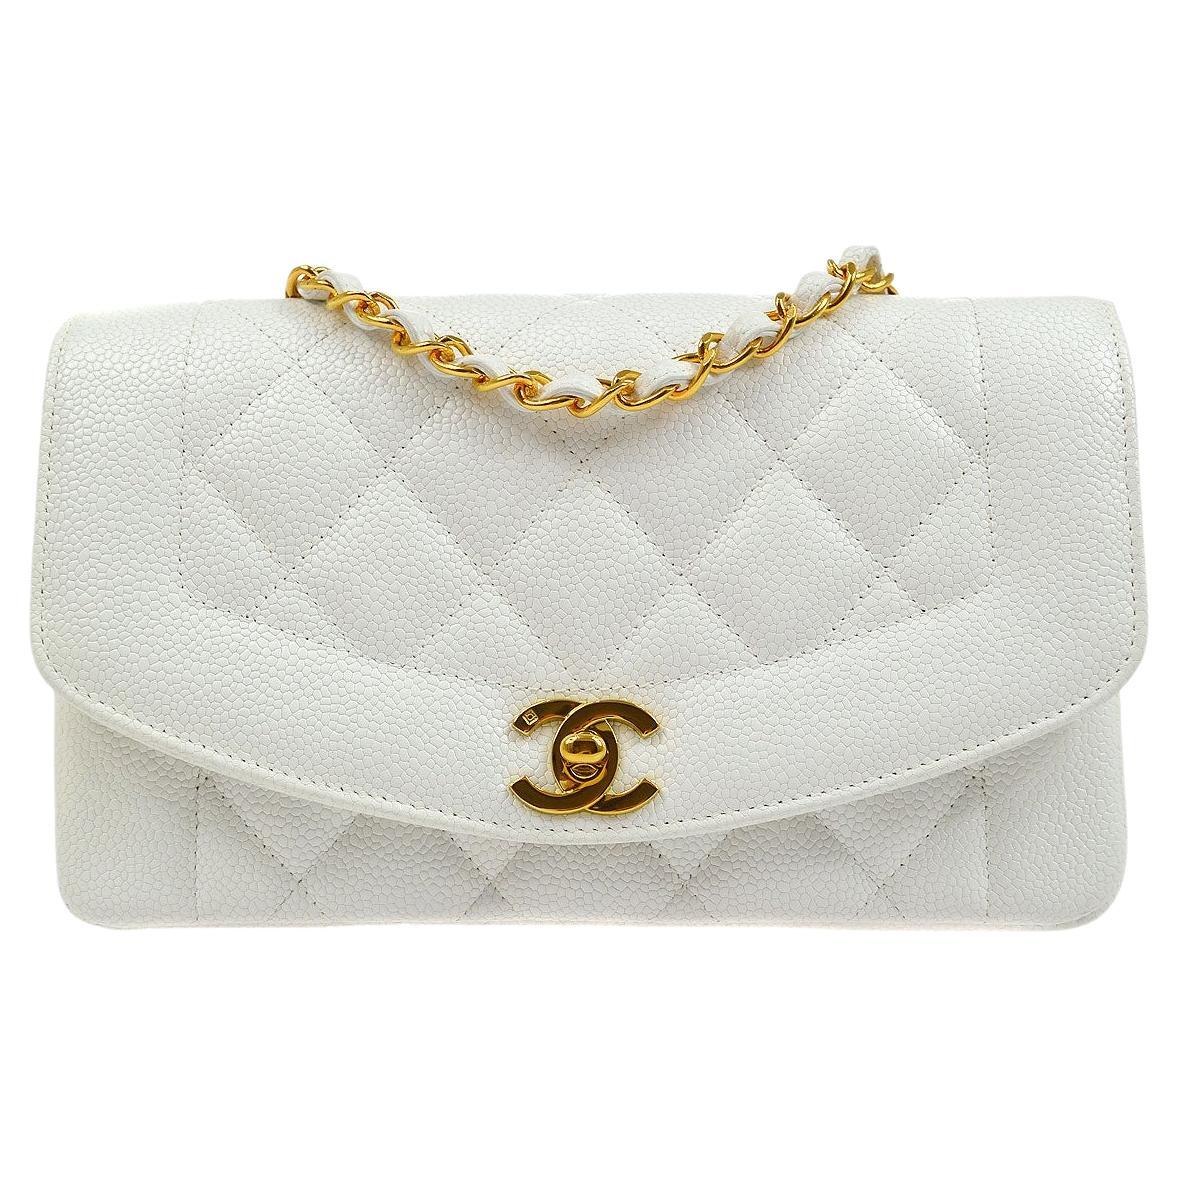 CHANEL White Caviar Leather Small Diana Gold Hardware Shoulder